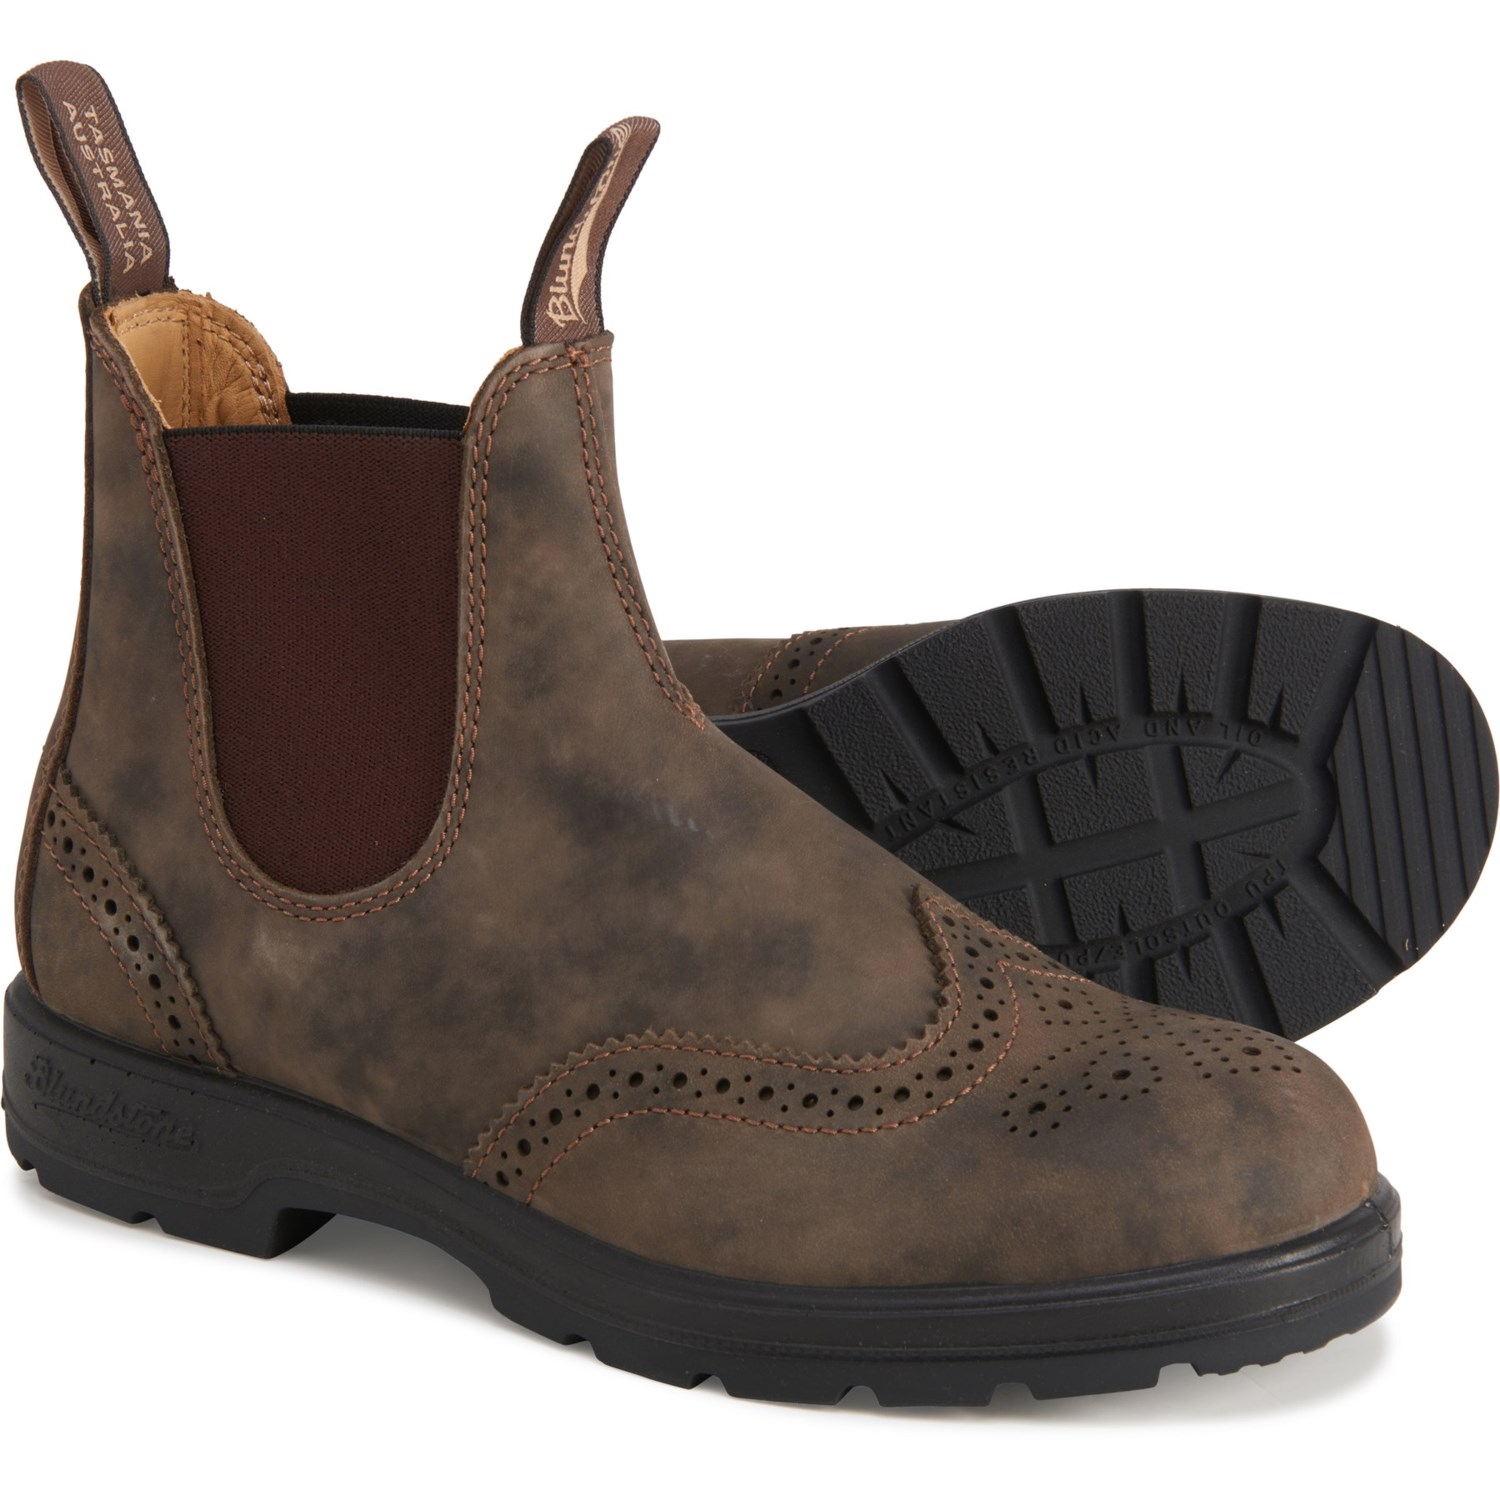 Blundstone 1471 Chelsea Boots (For 